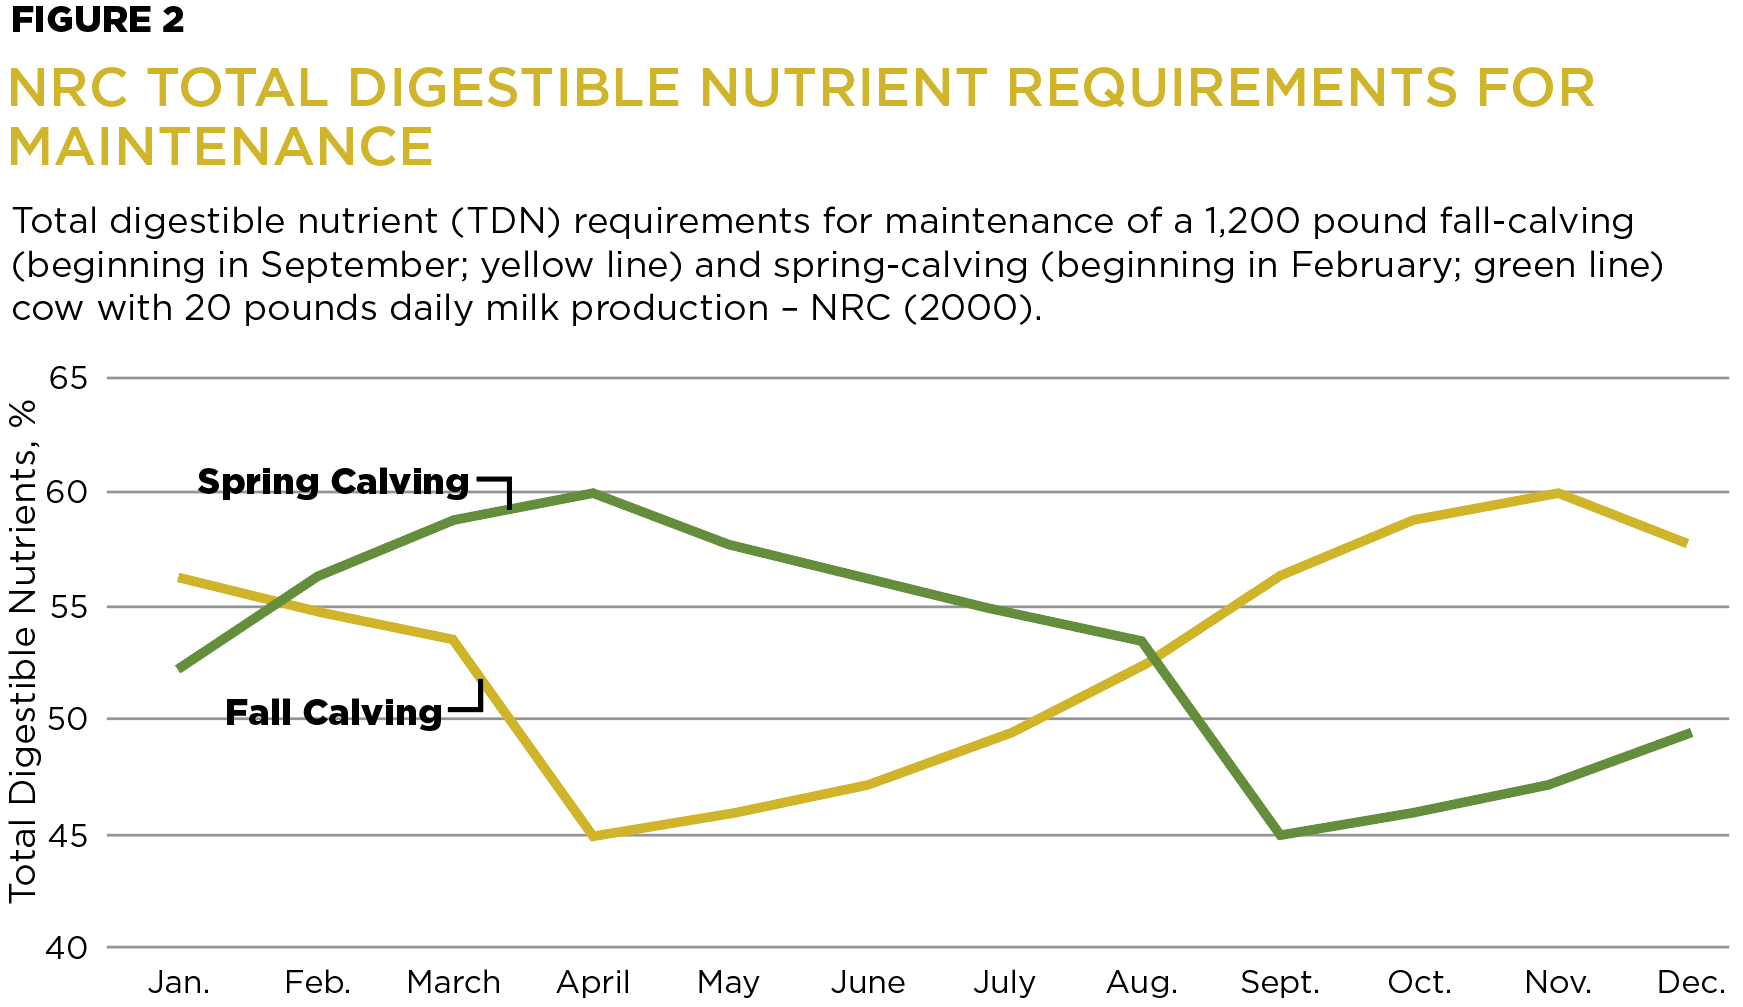 Figure 2: NRC Total Digestible Nutrient Requirements for Maintenance. Total digestible nutrient (TDN) requirements for maintenance of a 1,200 pound fall-calving (beginning in September; yellow line) and spring-calving (beginning in February; green line) cow with 20 pounds daily milk production – NRC (2000).